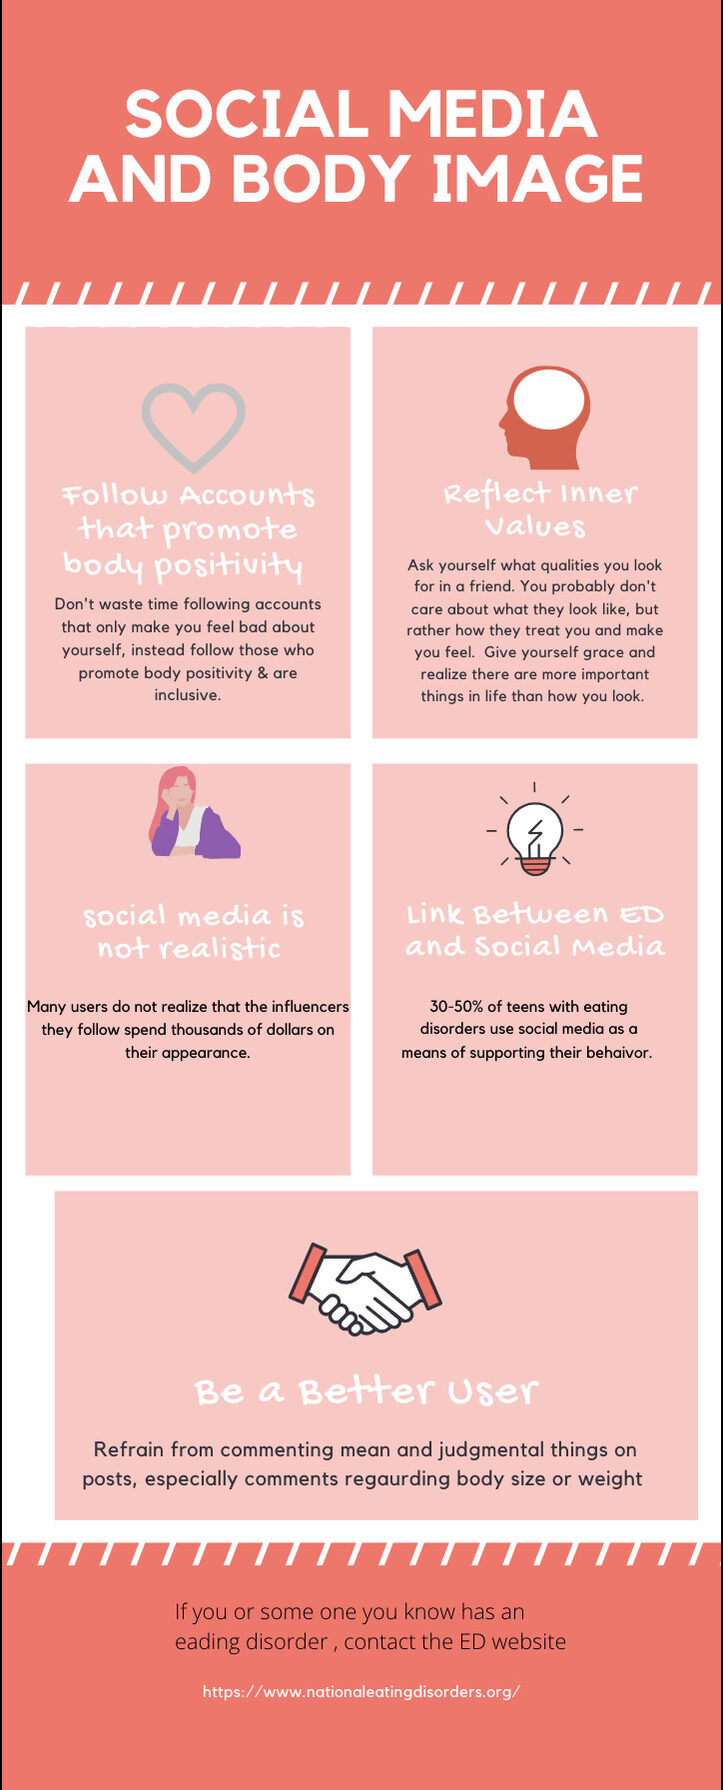 An orange and pink infographic on Social media and body image featuring a cartoon heart, head in profile, and shaking hands among other logos.